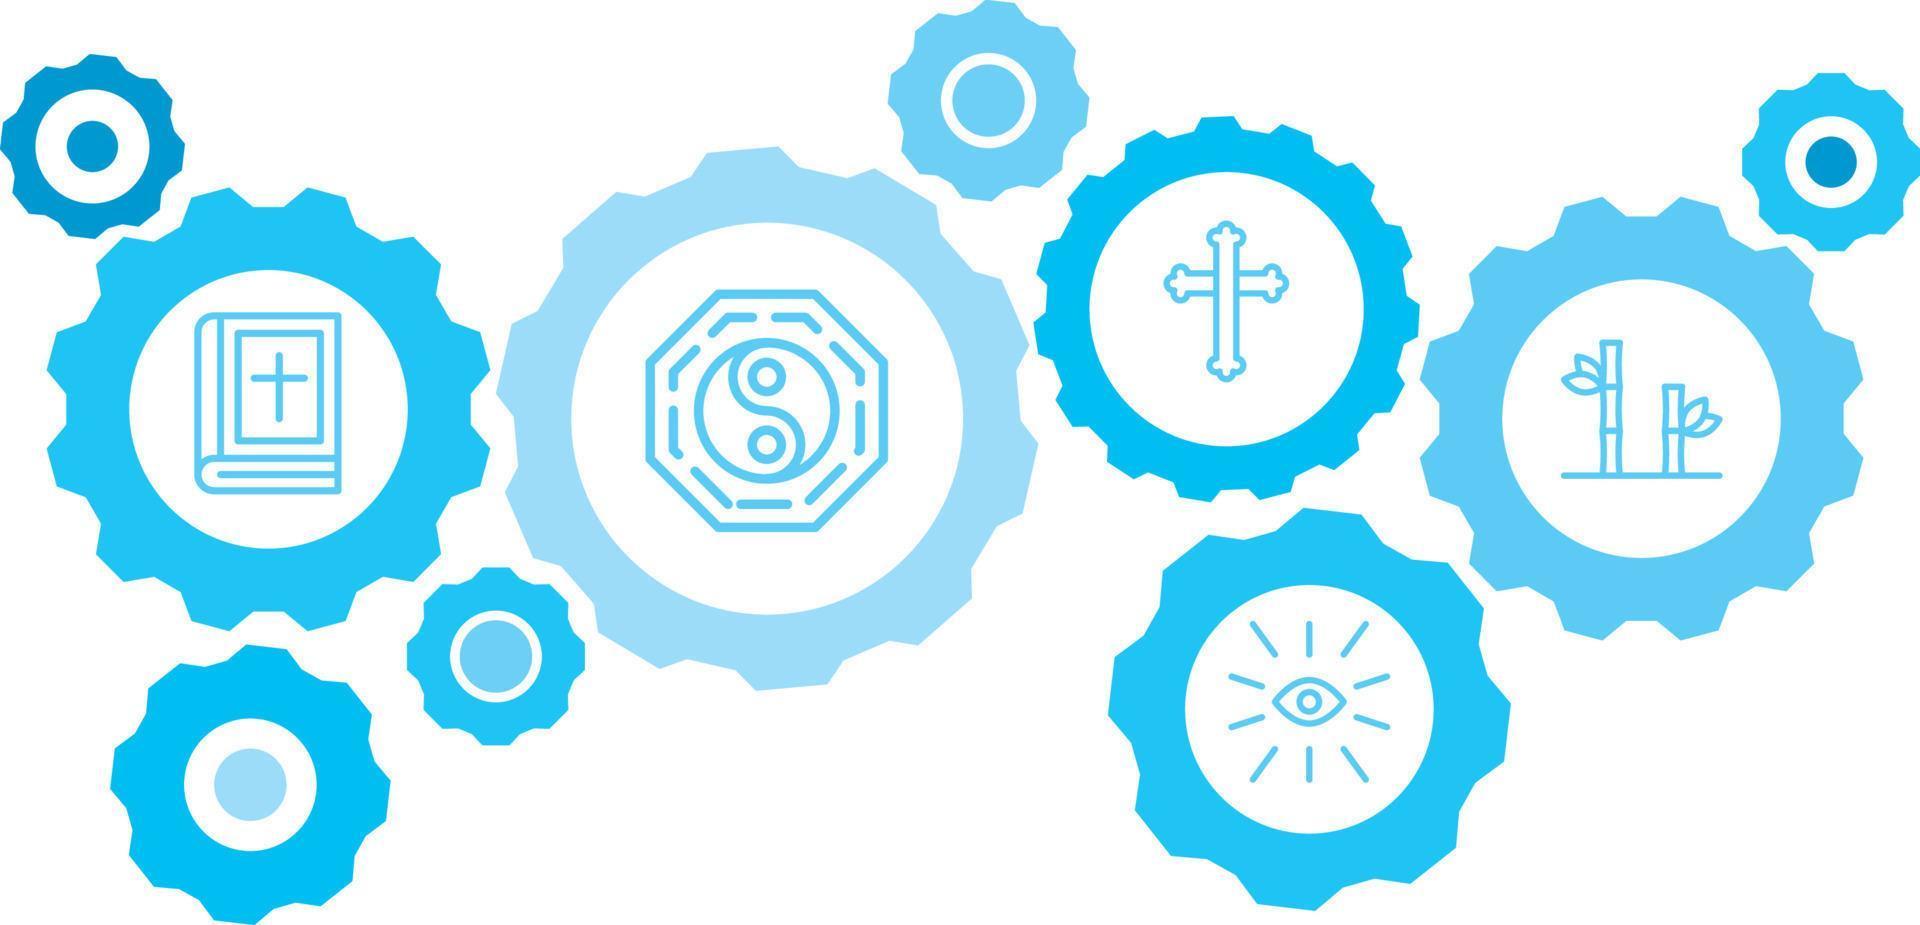 Bamboo symbol vector icon blue gear set. Abstract background with connected gears and icons for logistic, service, shipping, distribution, transport, market, communicate concepts on white background